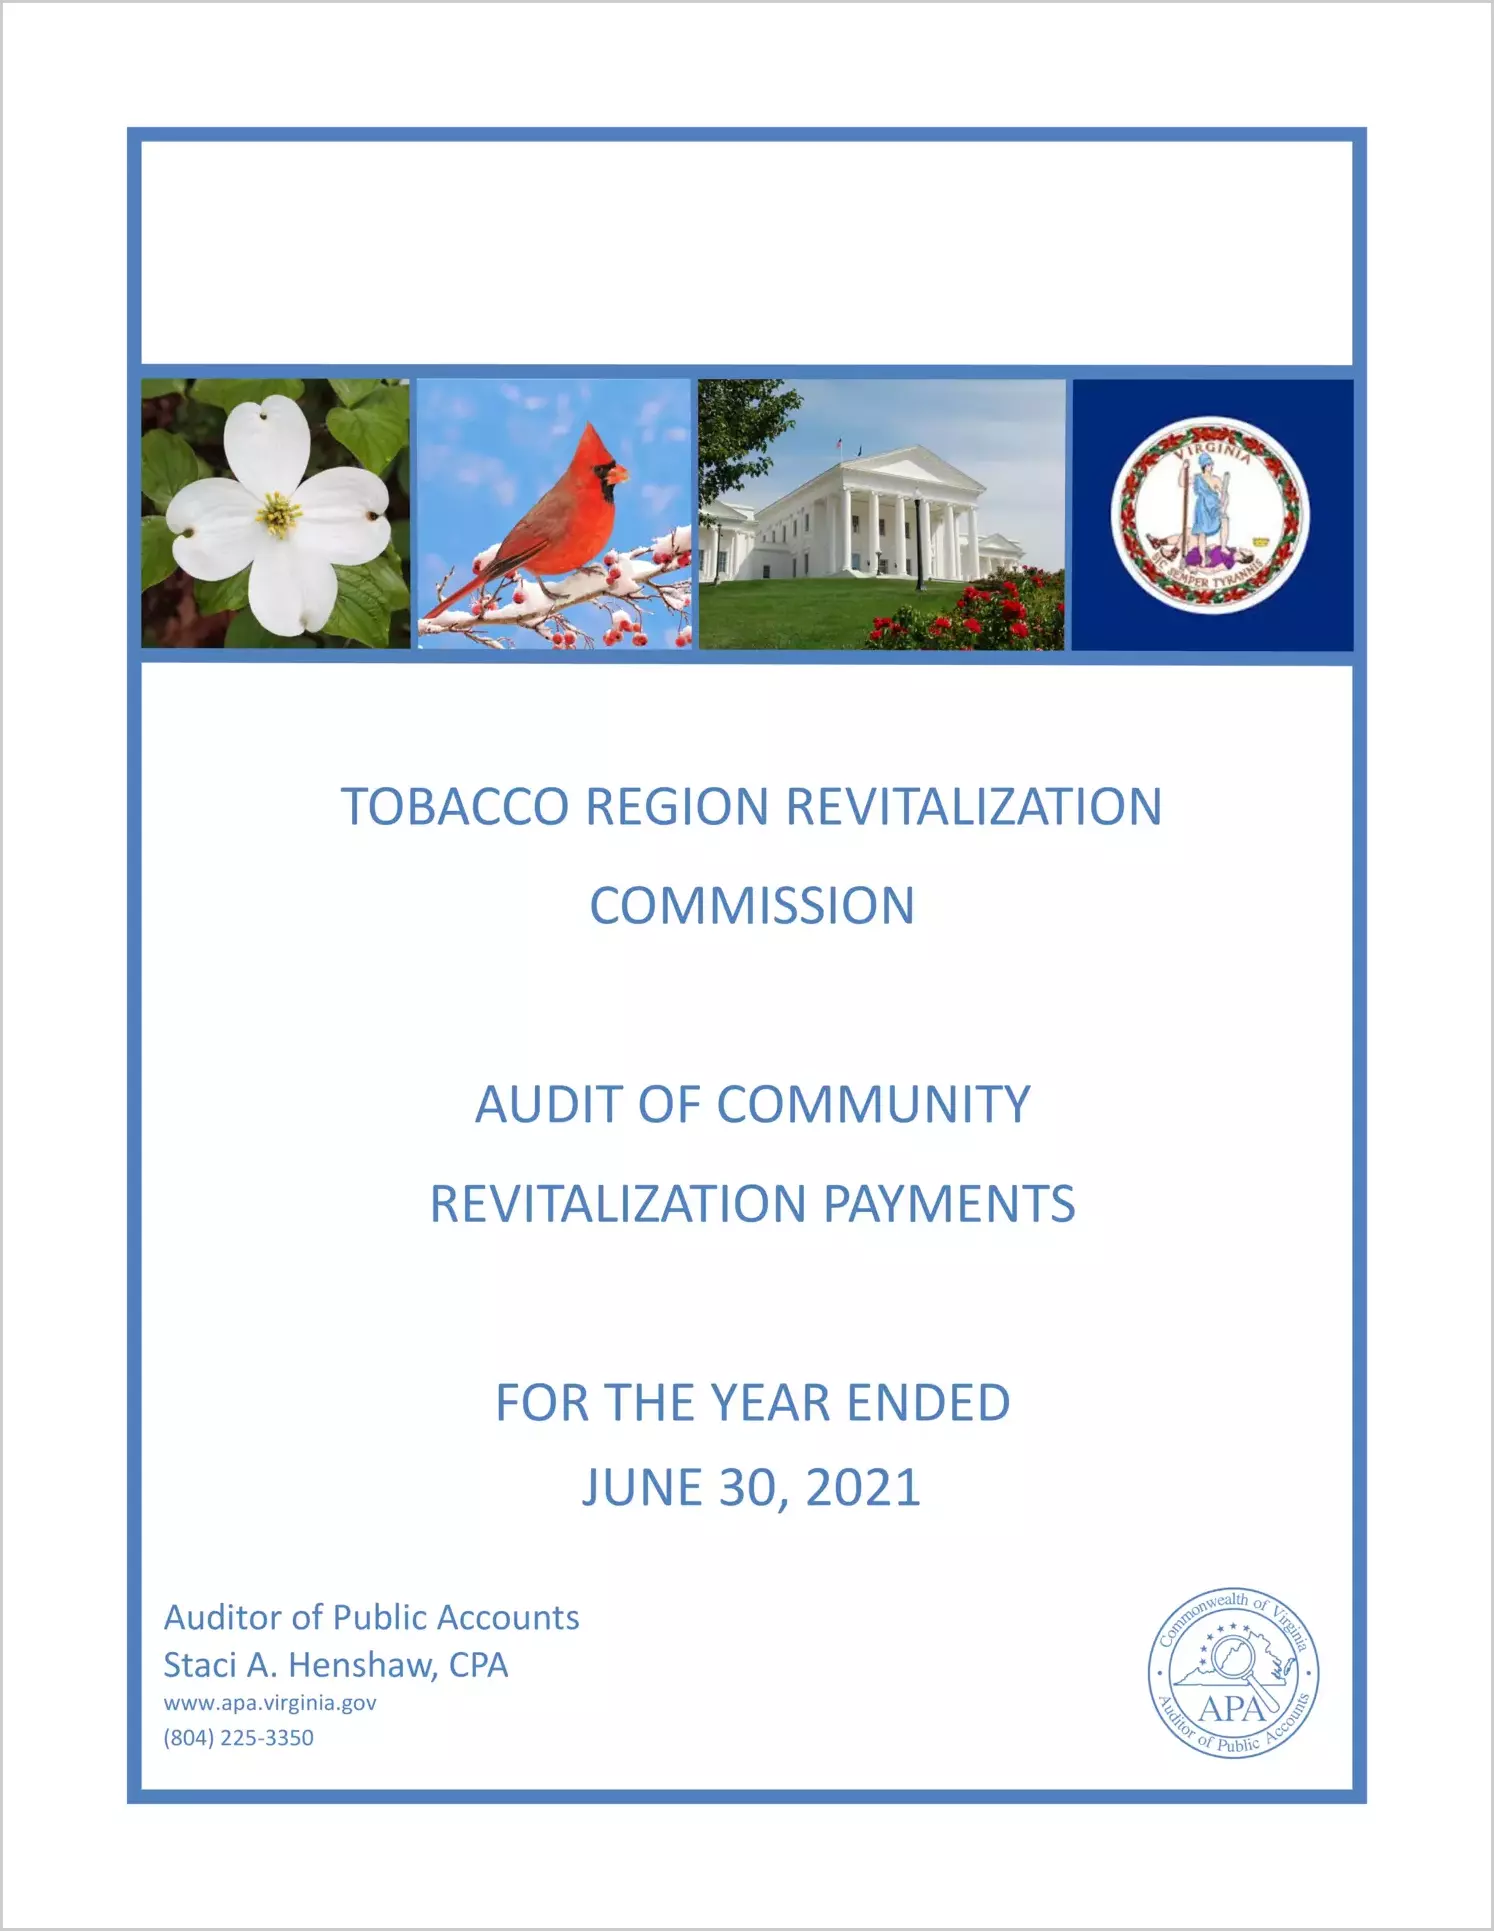 Tobacco Region Revitalization Commission for the year ended June 30, 2021